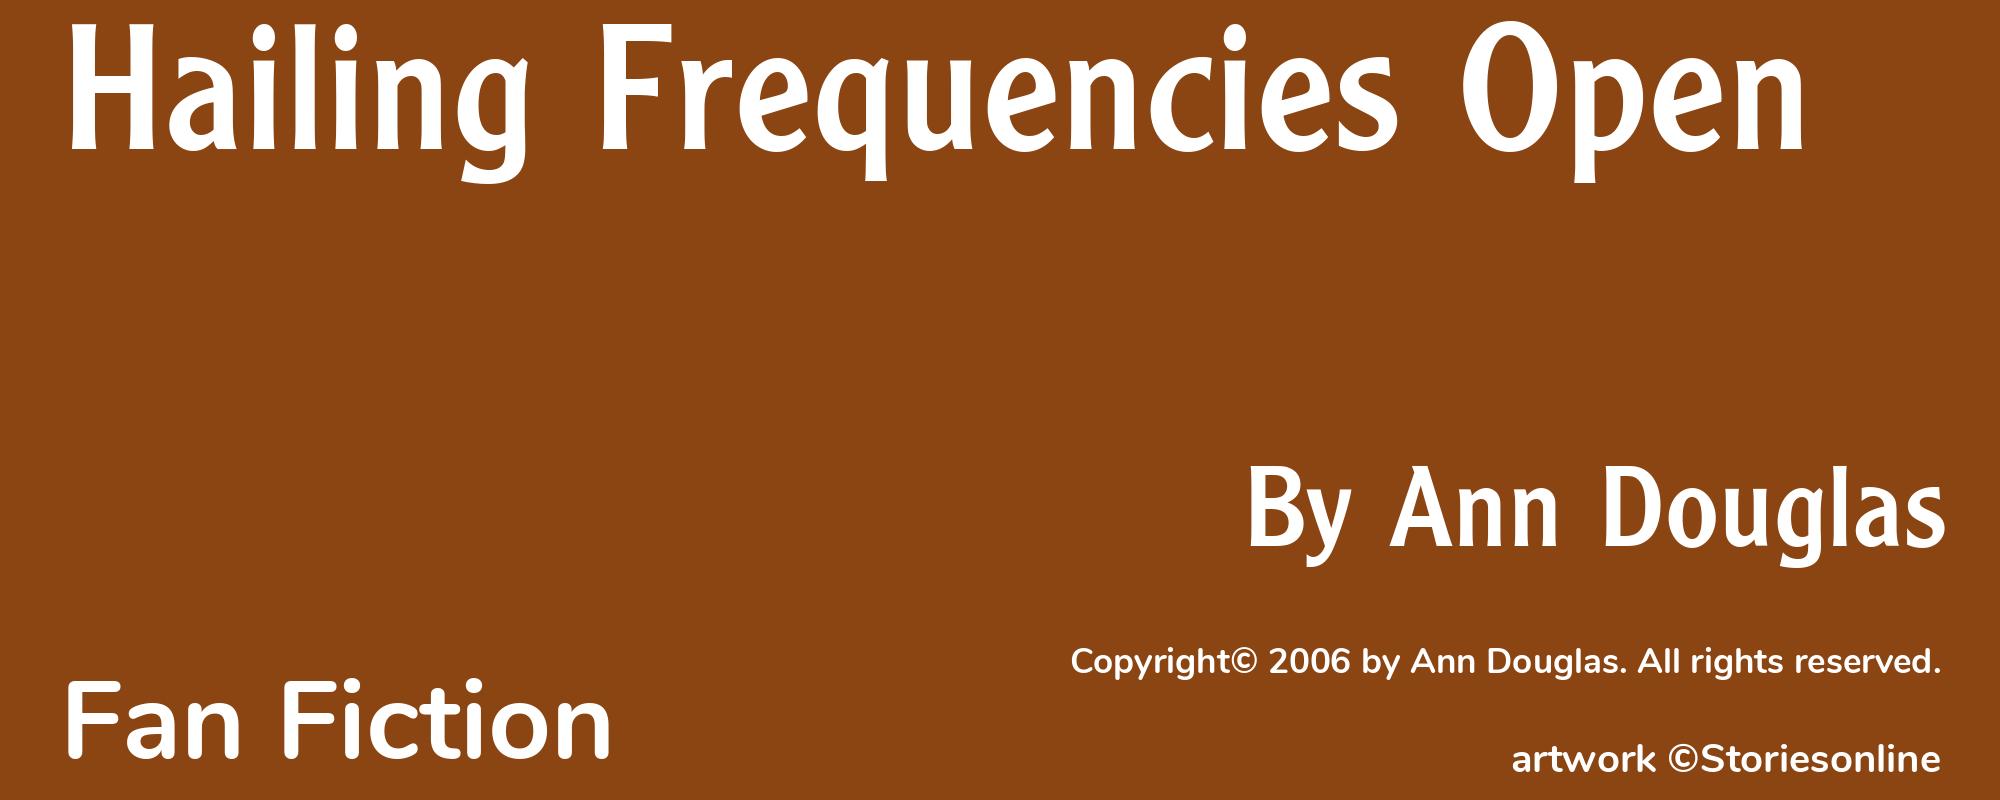 Hailing Frequencies Open - Cover